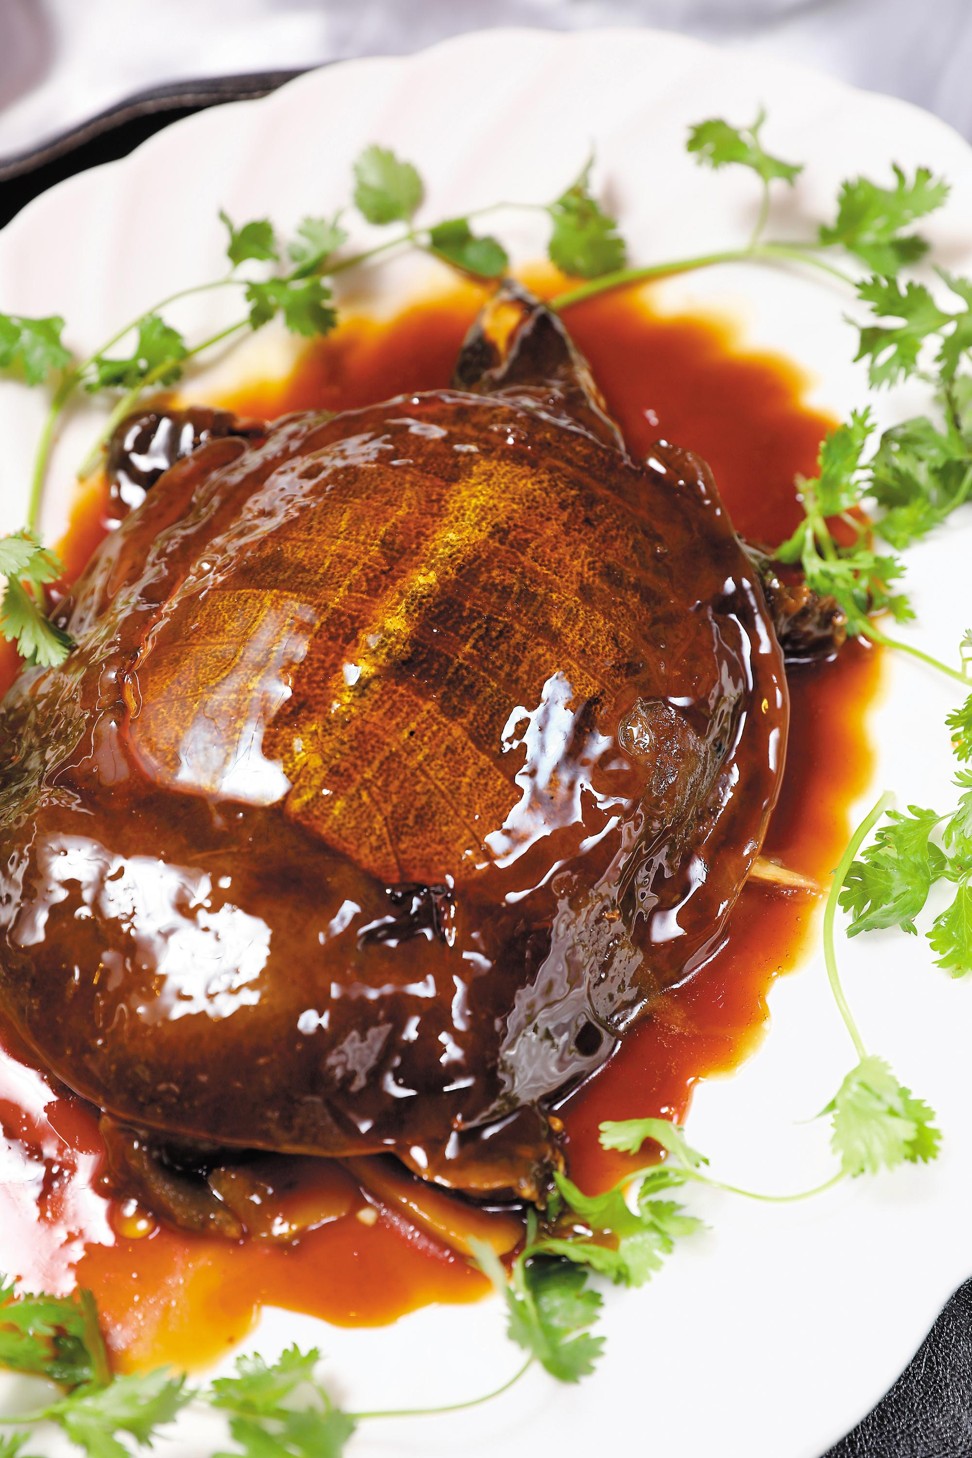 Steamed turtle in crystal sugar sauce, a Shanghainese classic at Wang Jie’s Private Kitchen